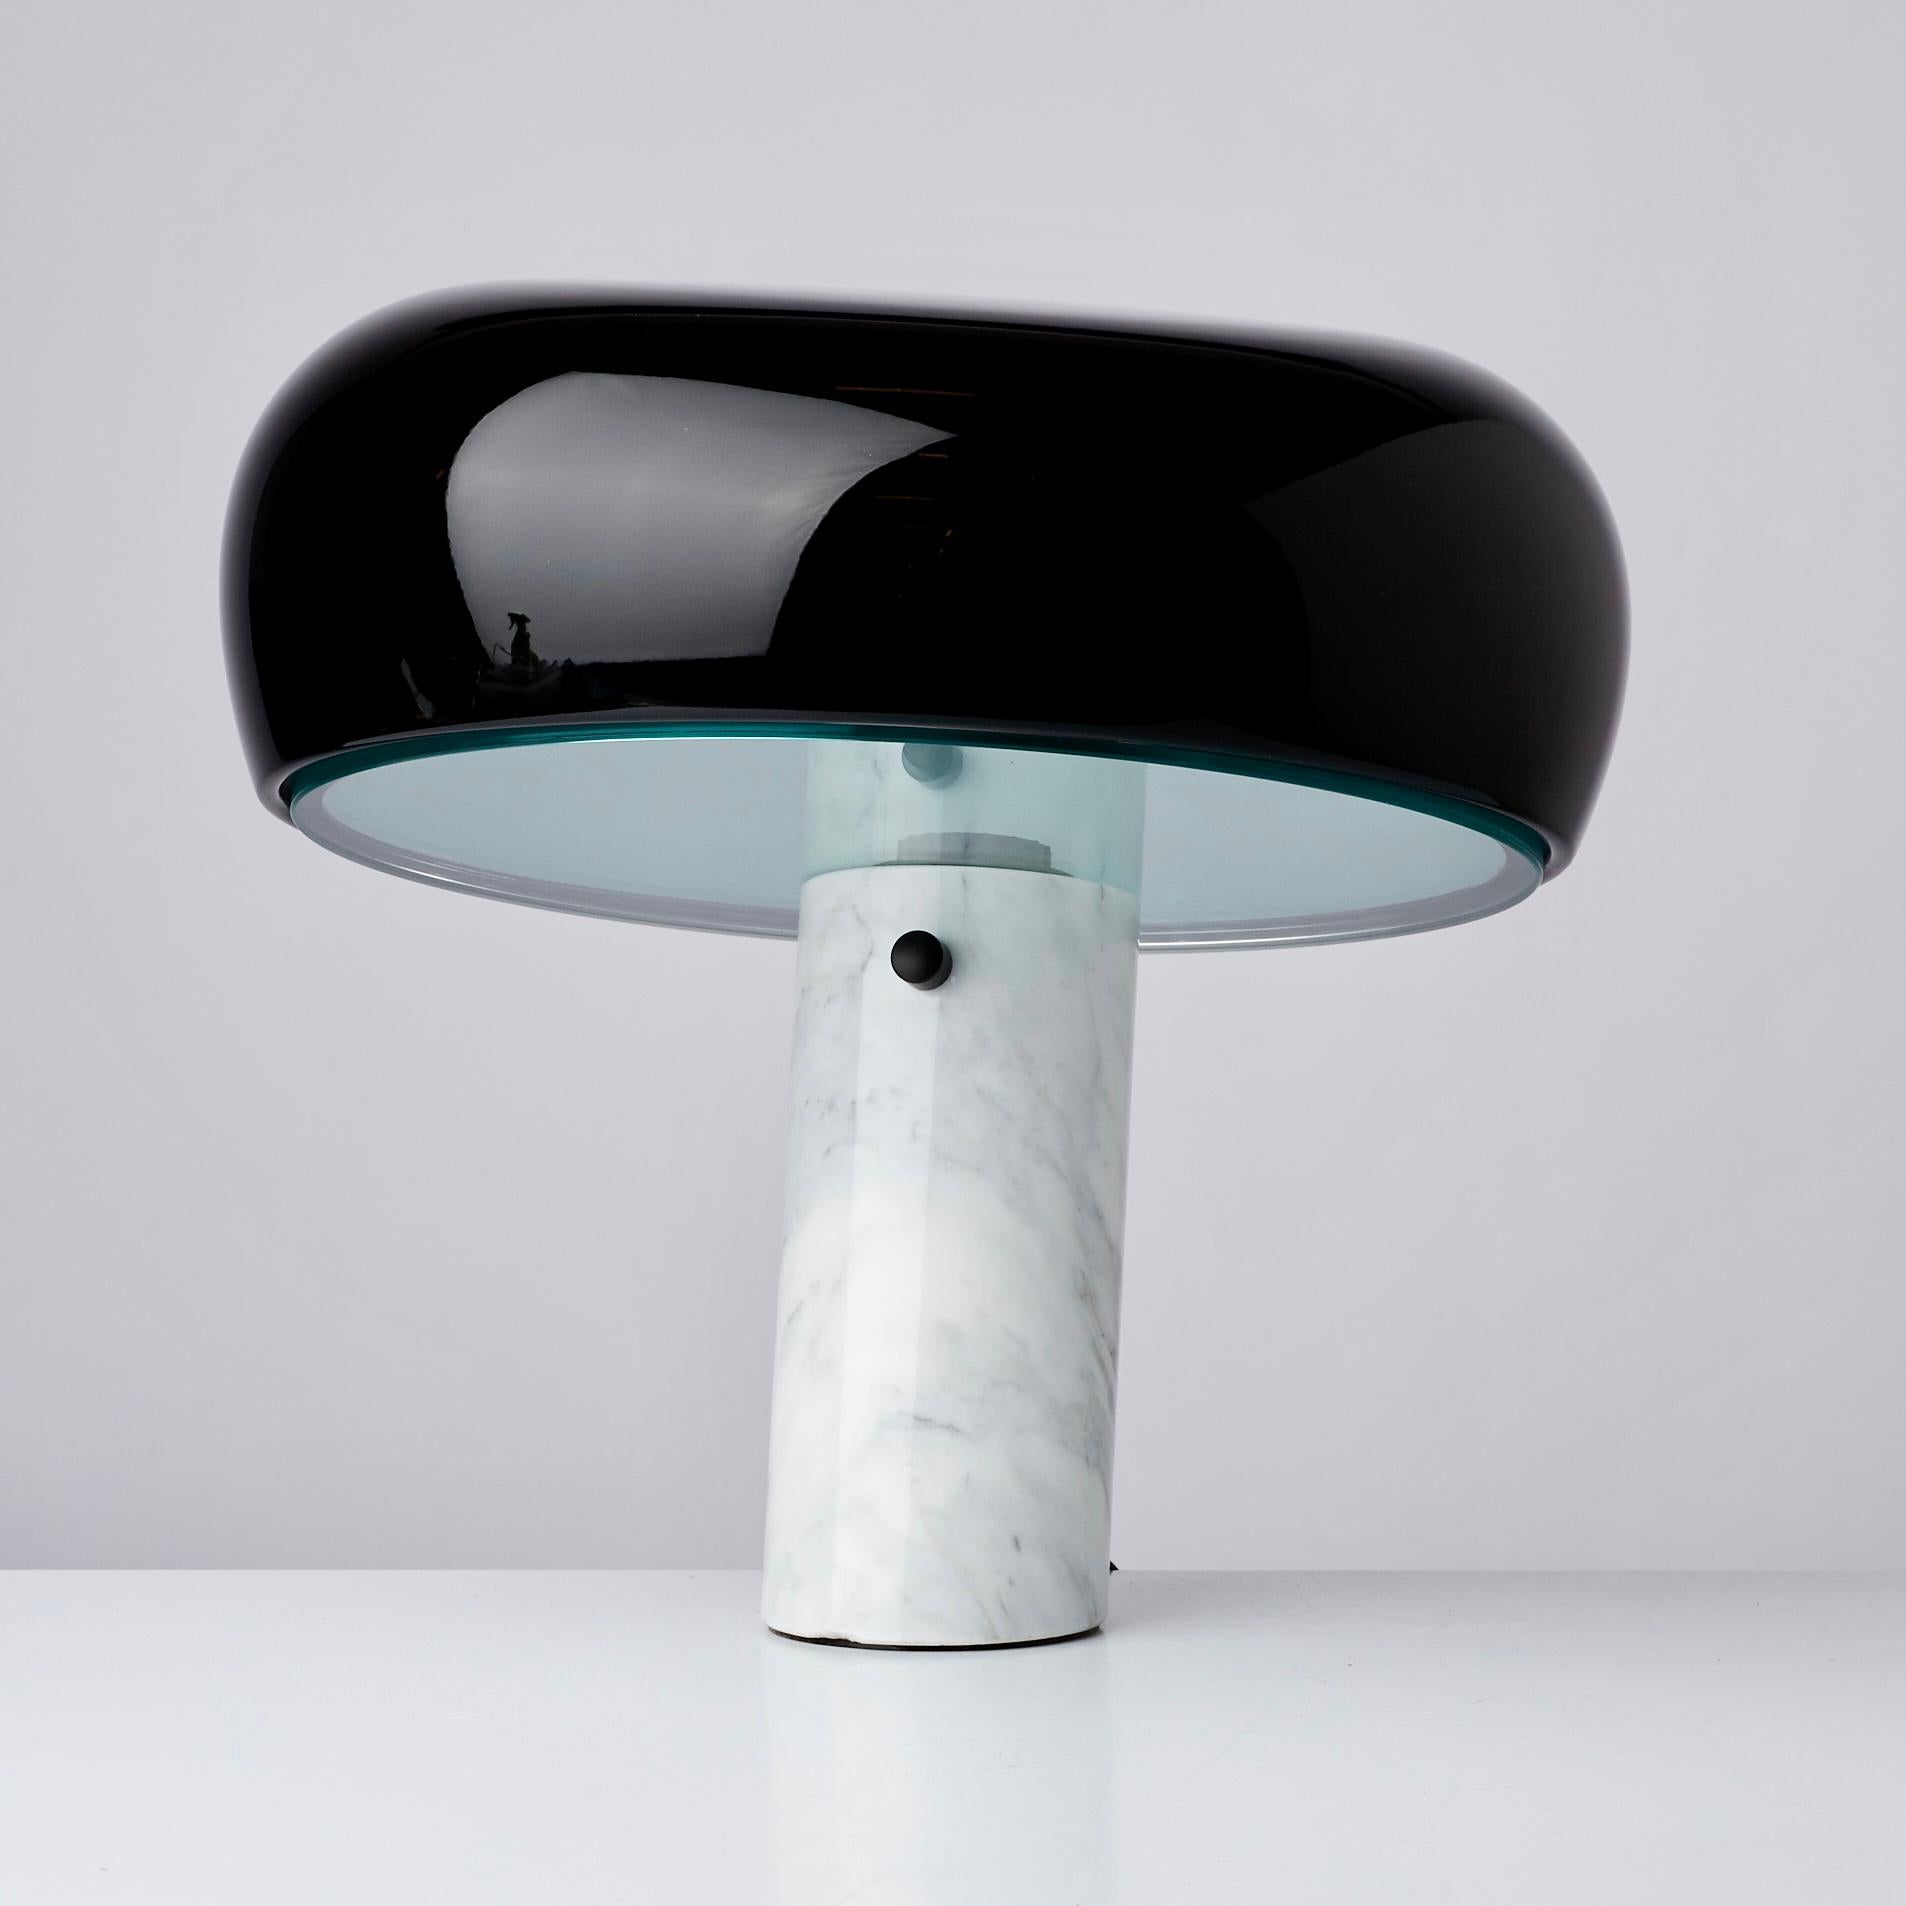 Snoopy table lamp from Flos, model originally designed in 1967 by Achille & Pier Giacomo Castiglioni, lamp base in white marble, shade in lacquered black metal and clear glass. Touch sensor dimmer and switch.